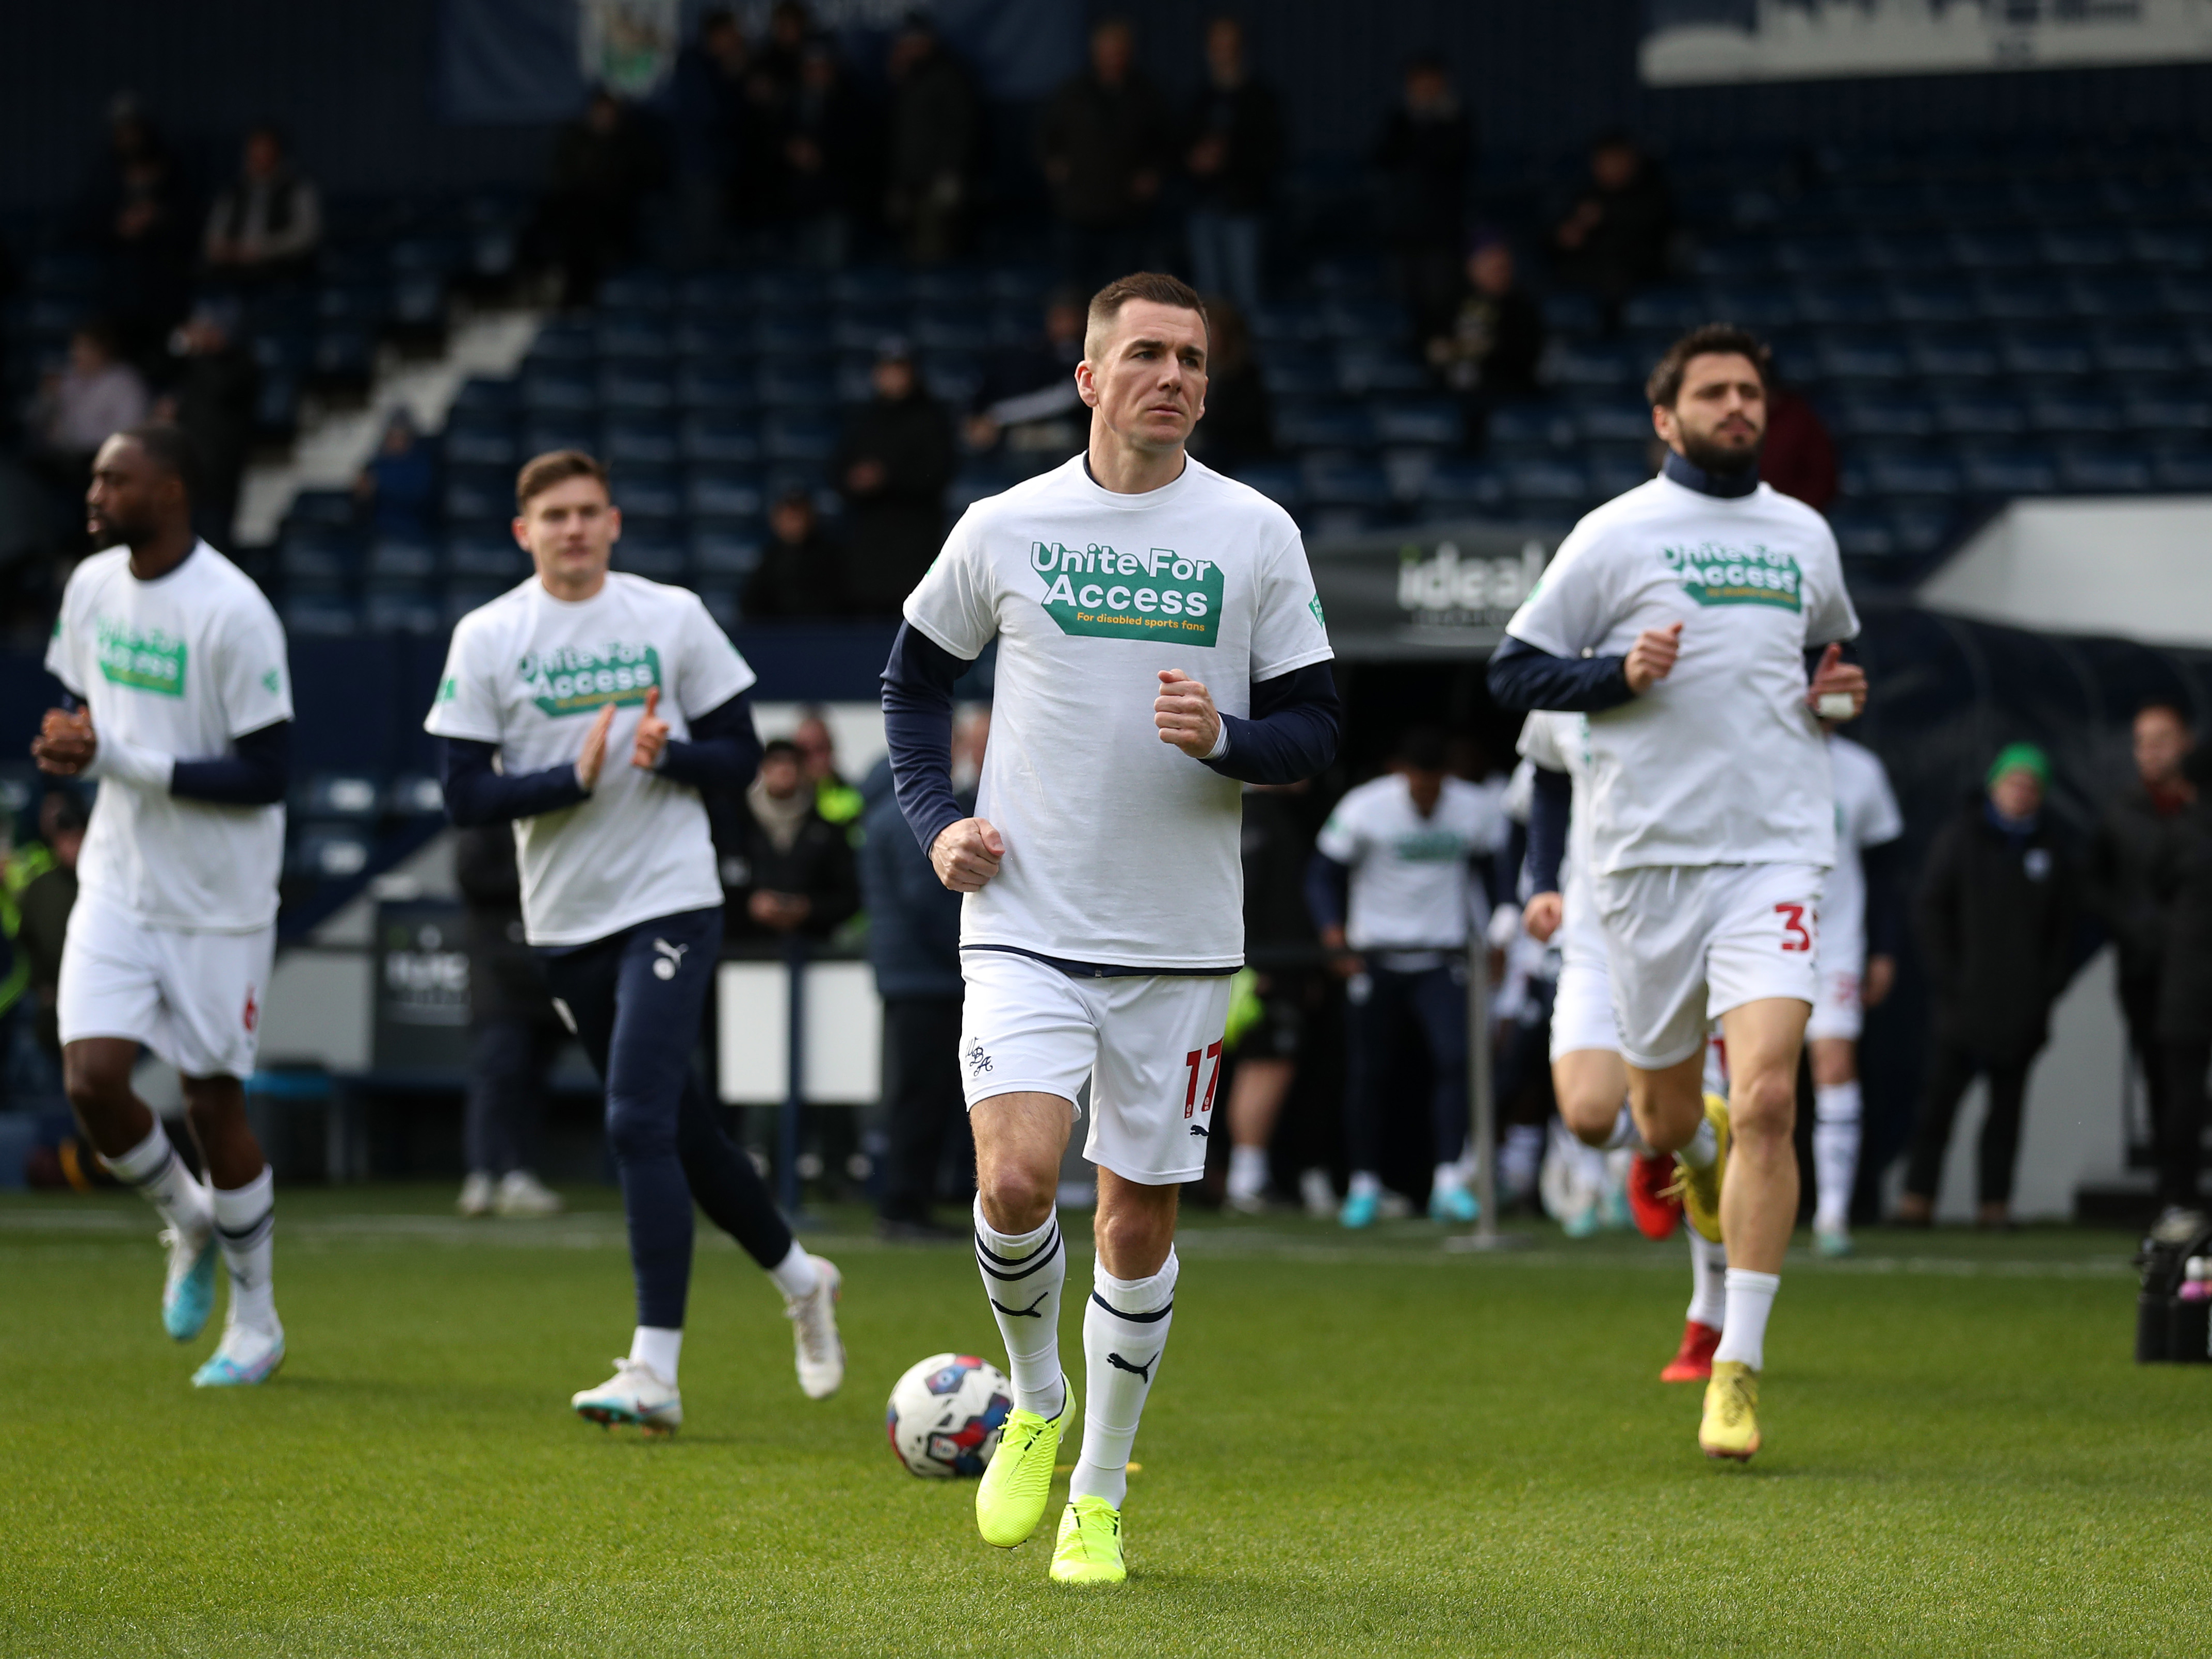 An image of Jed Wallace, and other Albion players, wearing Level Playing Field warm-up shirts